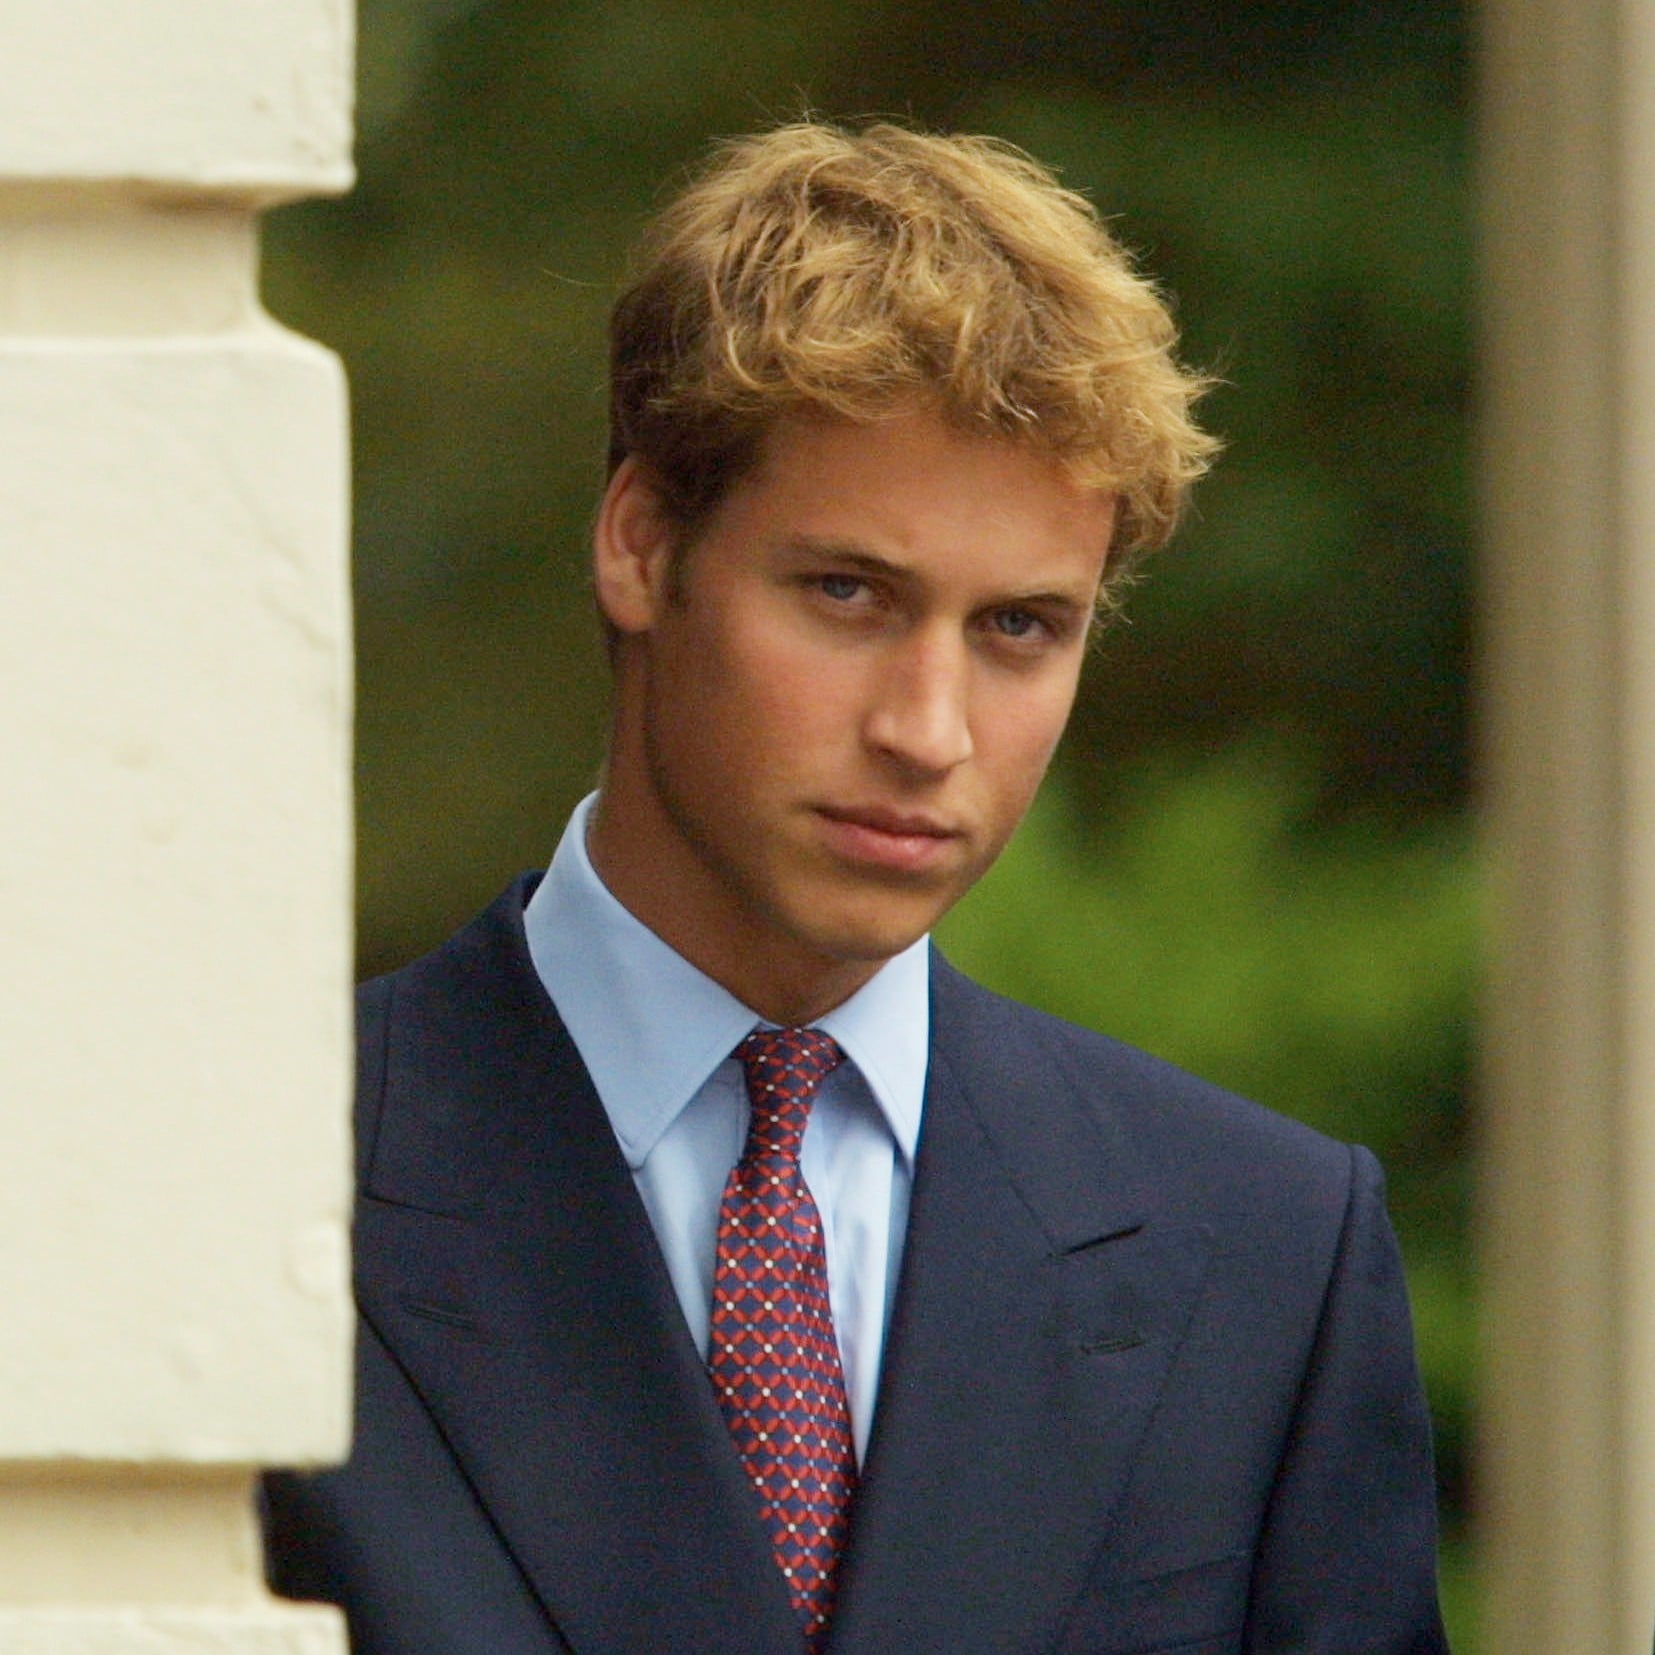 Prince William debuts striking new clean-shaven hairstyle | Page 8